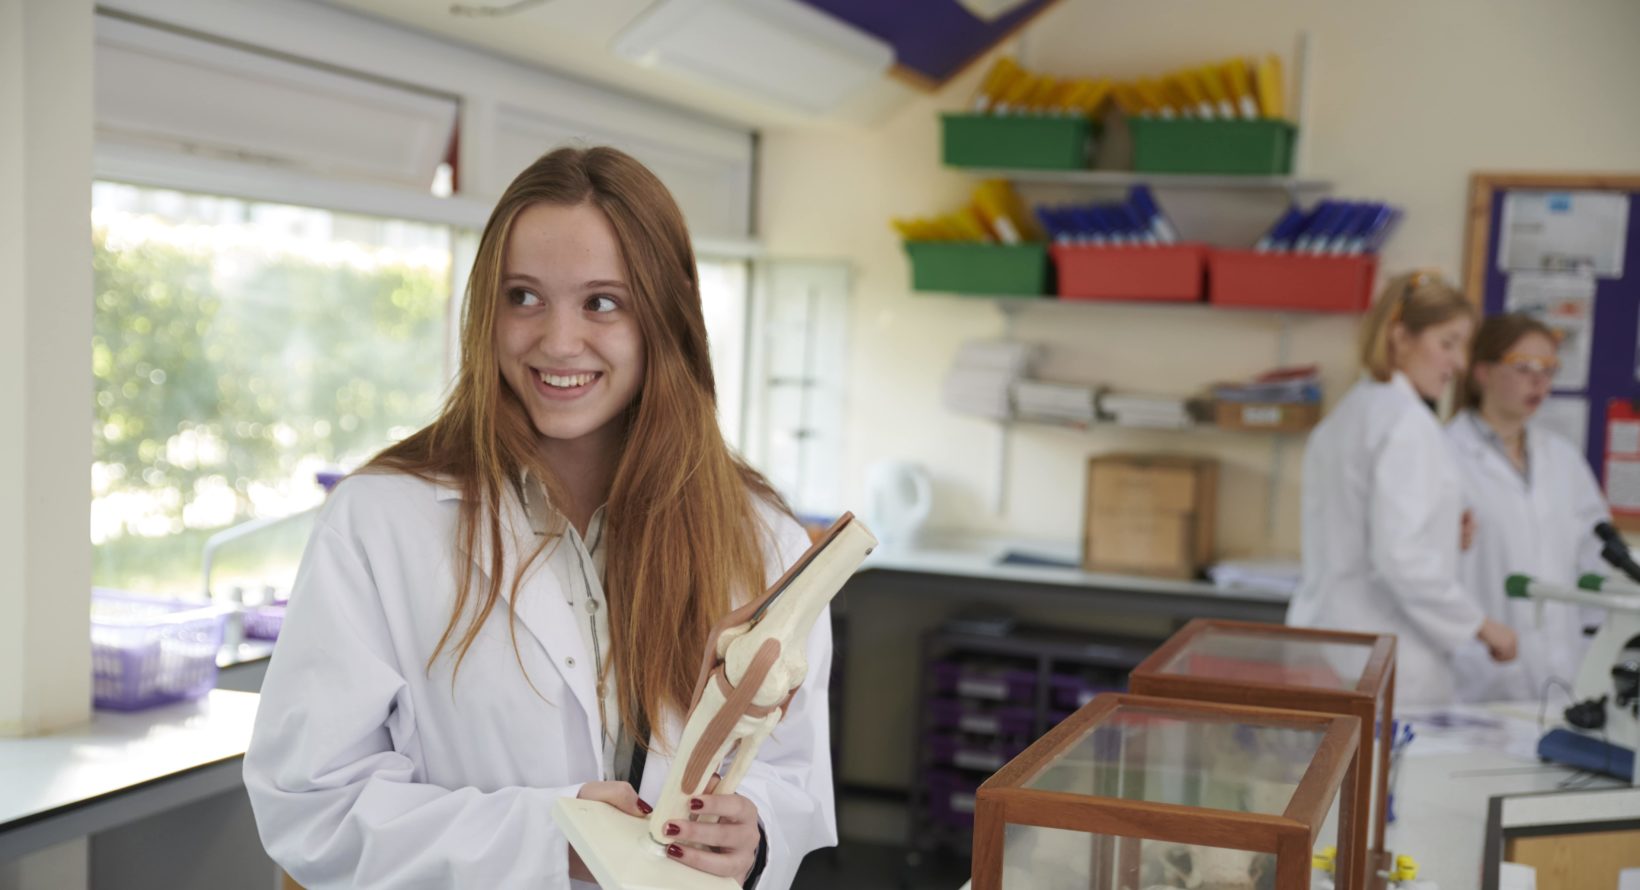 Magdalen College School pupil in lab coat studying science